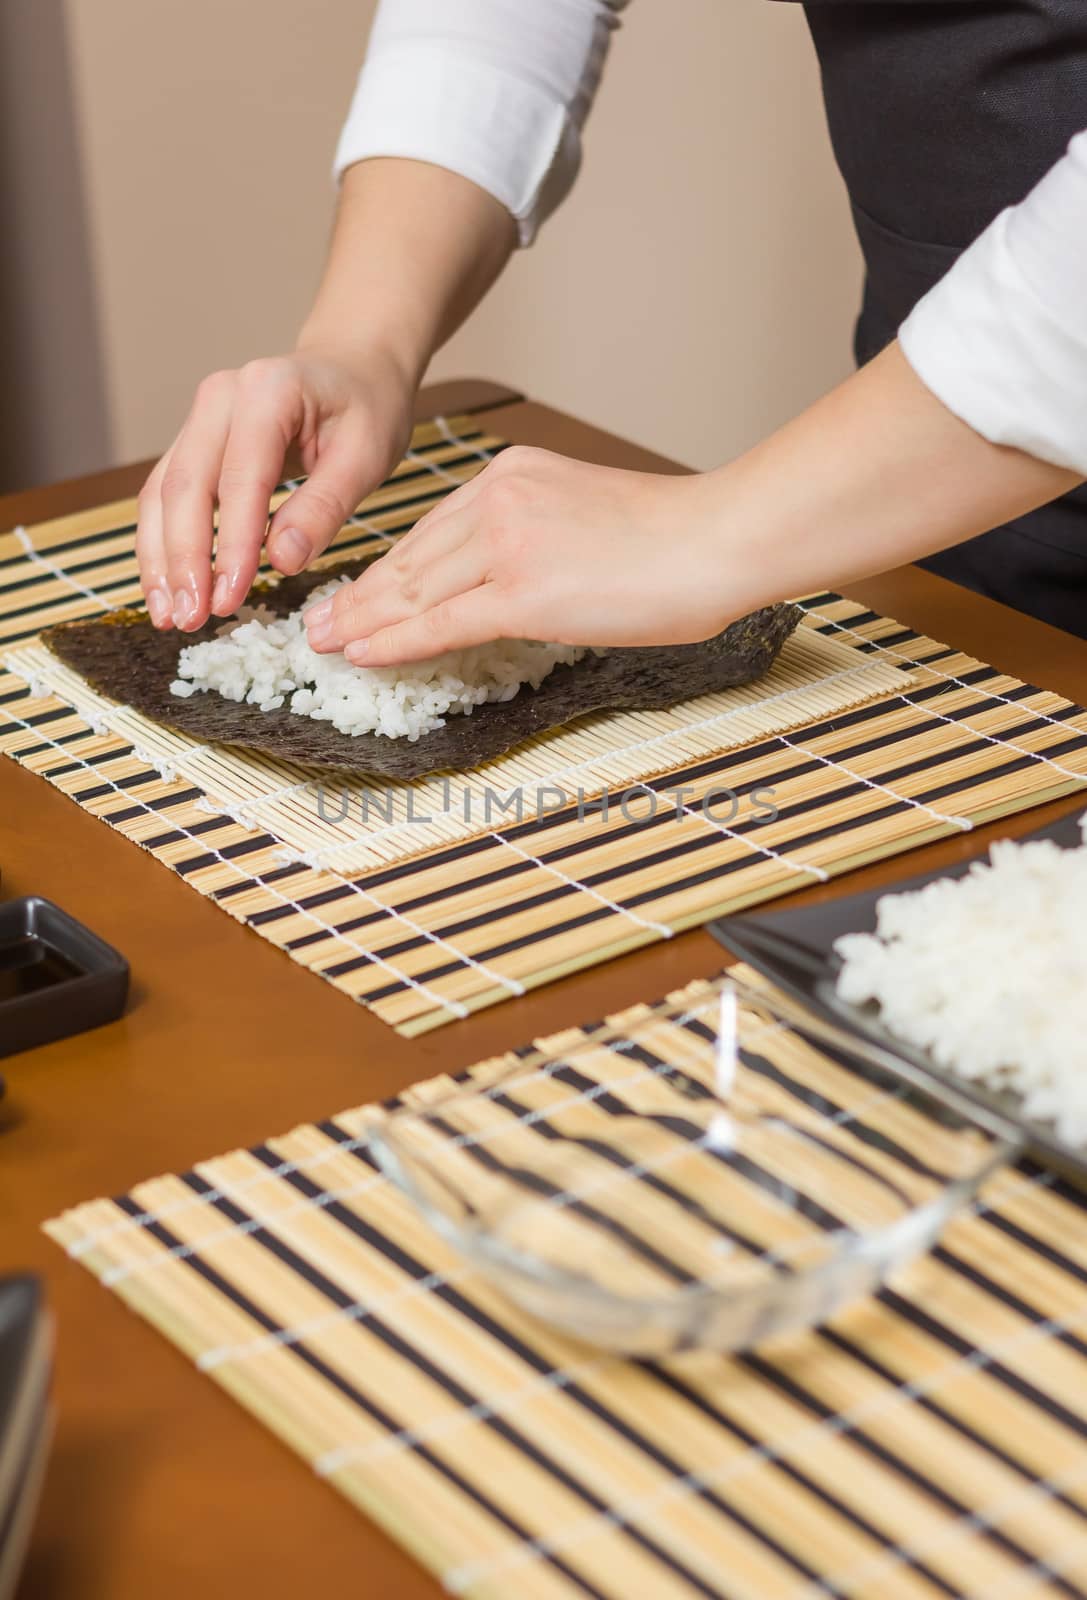 Hands of woman chef filling japanese sushi rolls with rice on a nori seaweed sheet